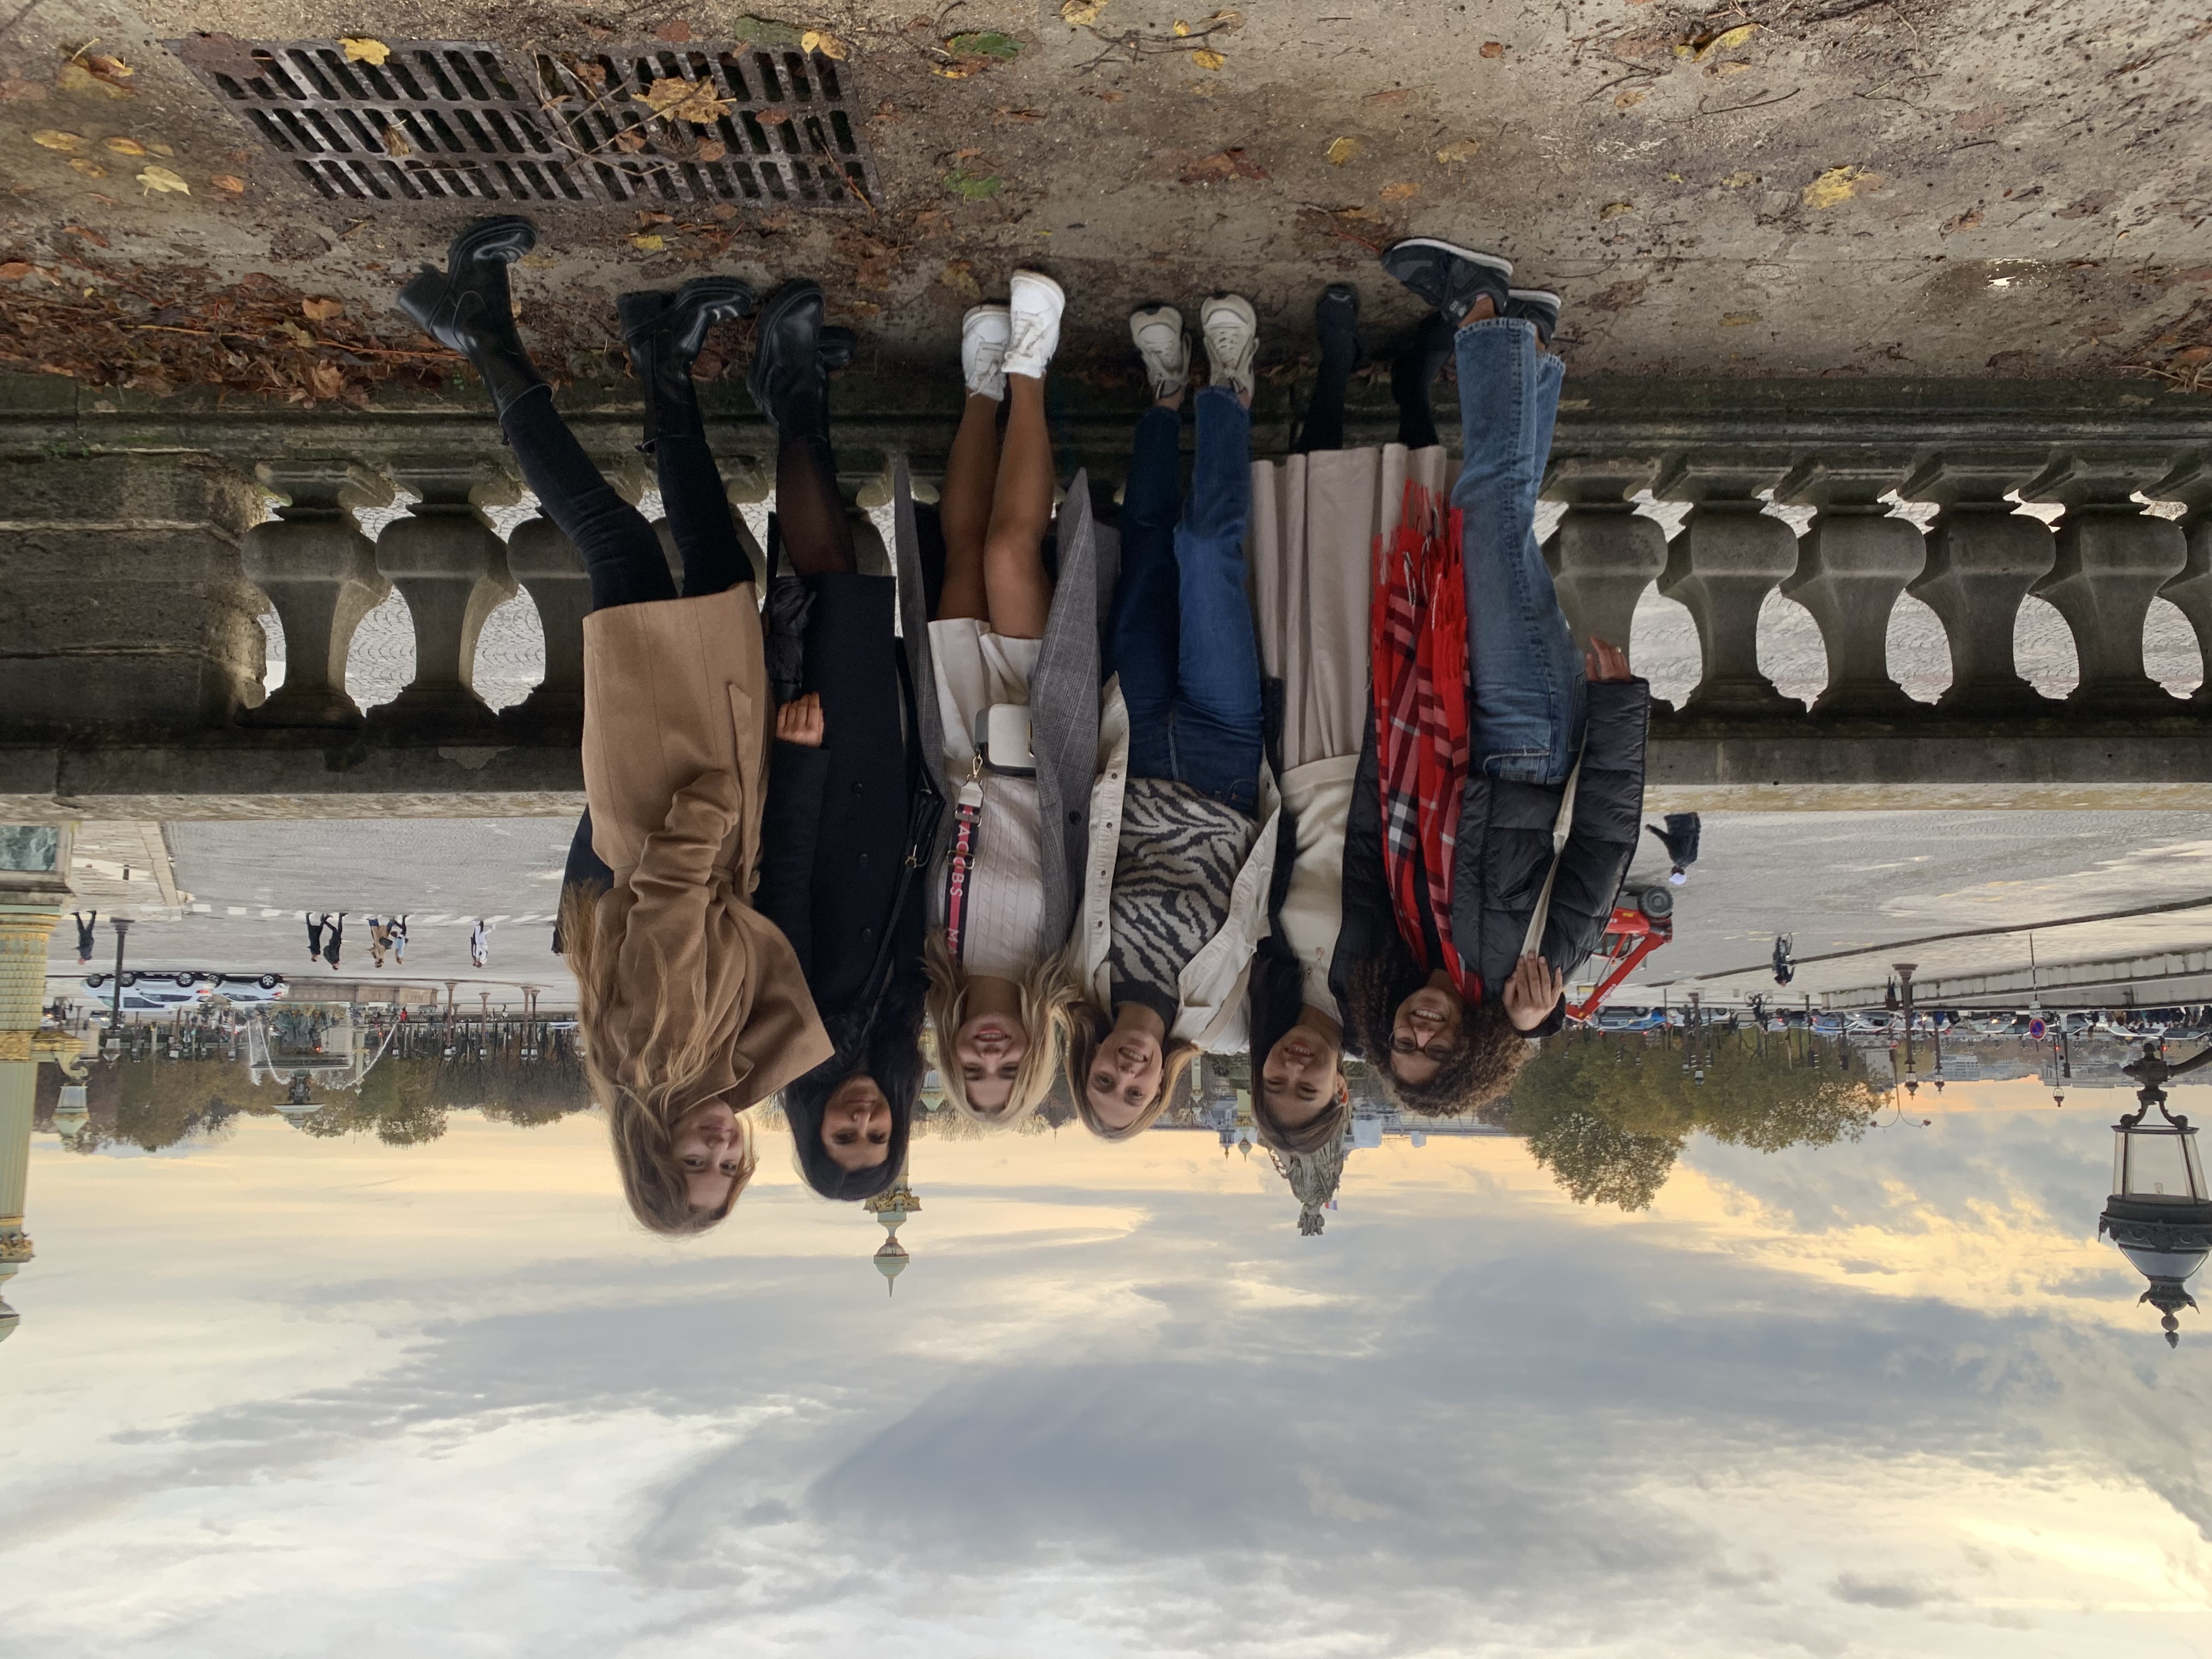 Darin Hany poses with her friends in Paris 